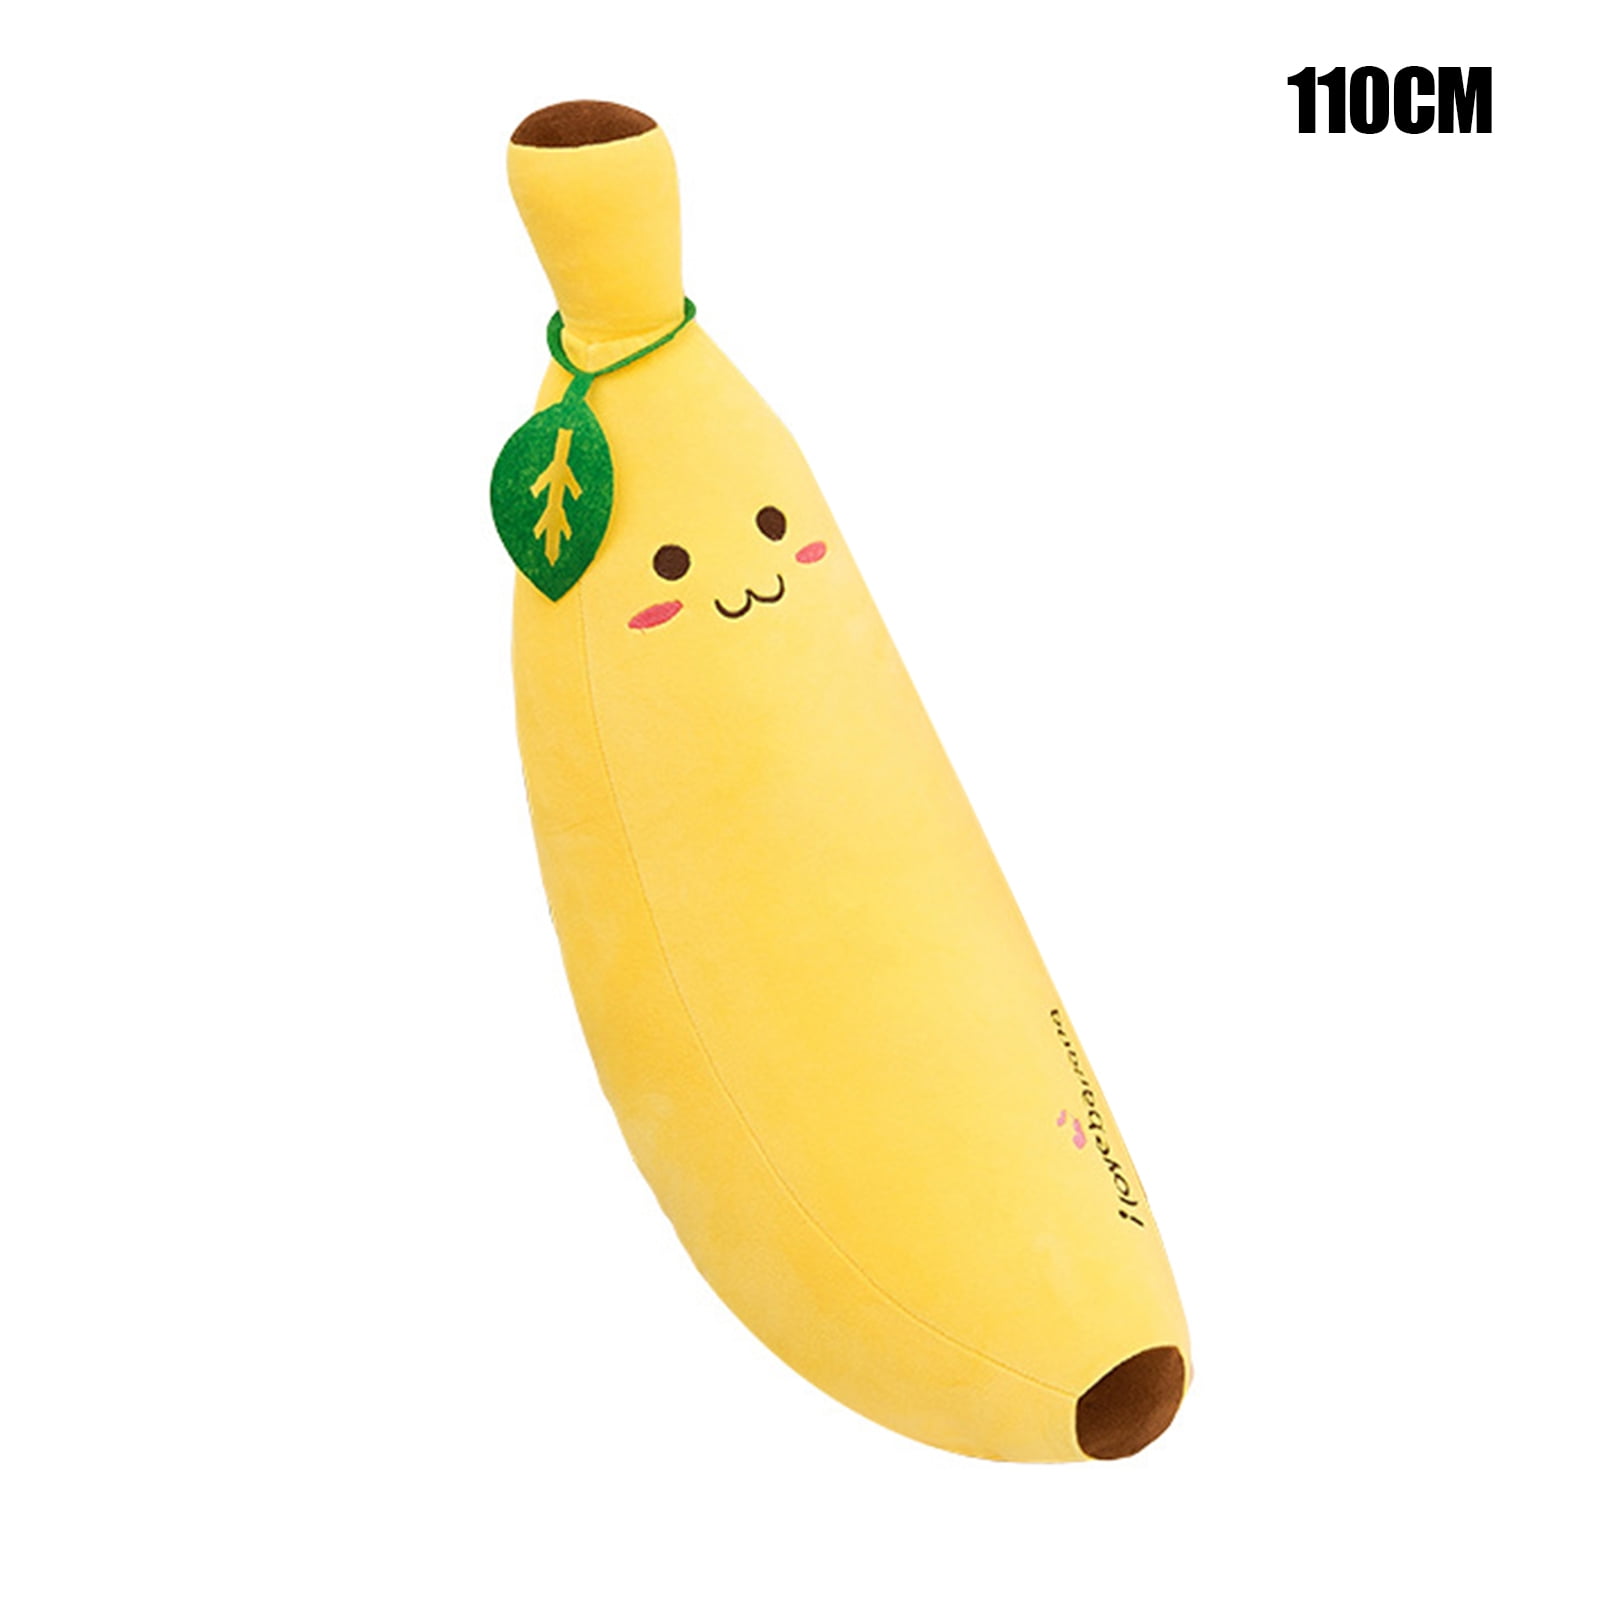 Details about   New 39'' Giant Big Yellow Banana Plush Doll Stuffed Cushion Realistic Pillow Toy 